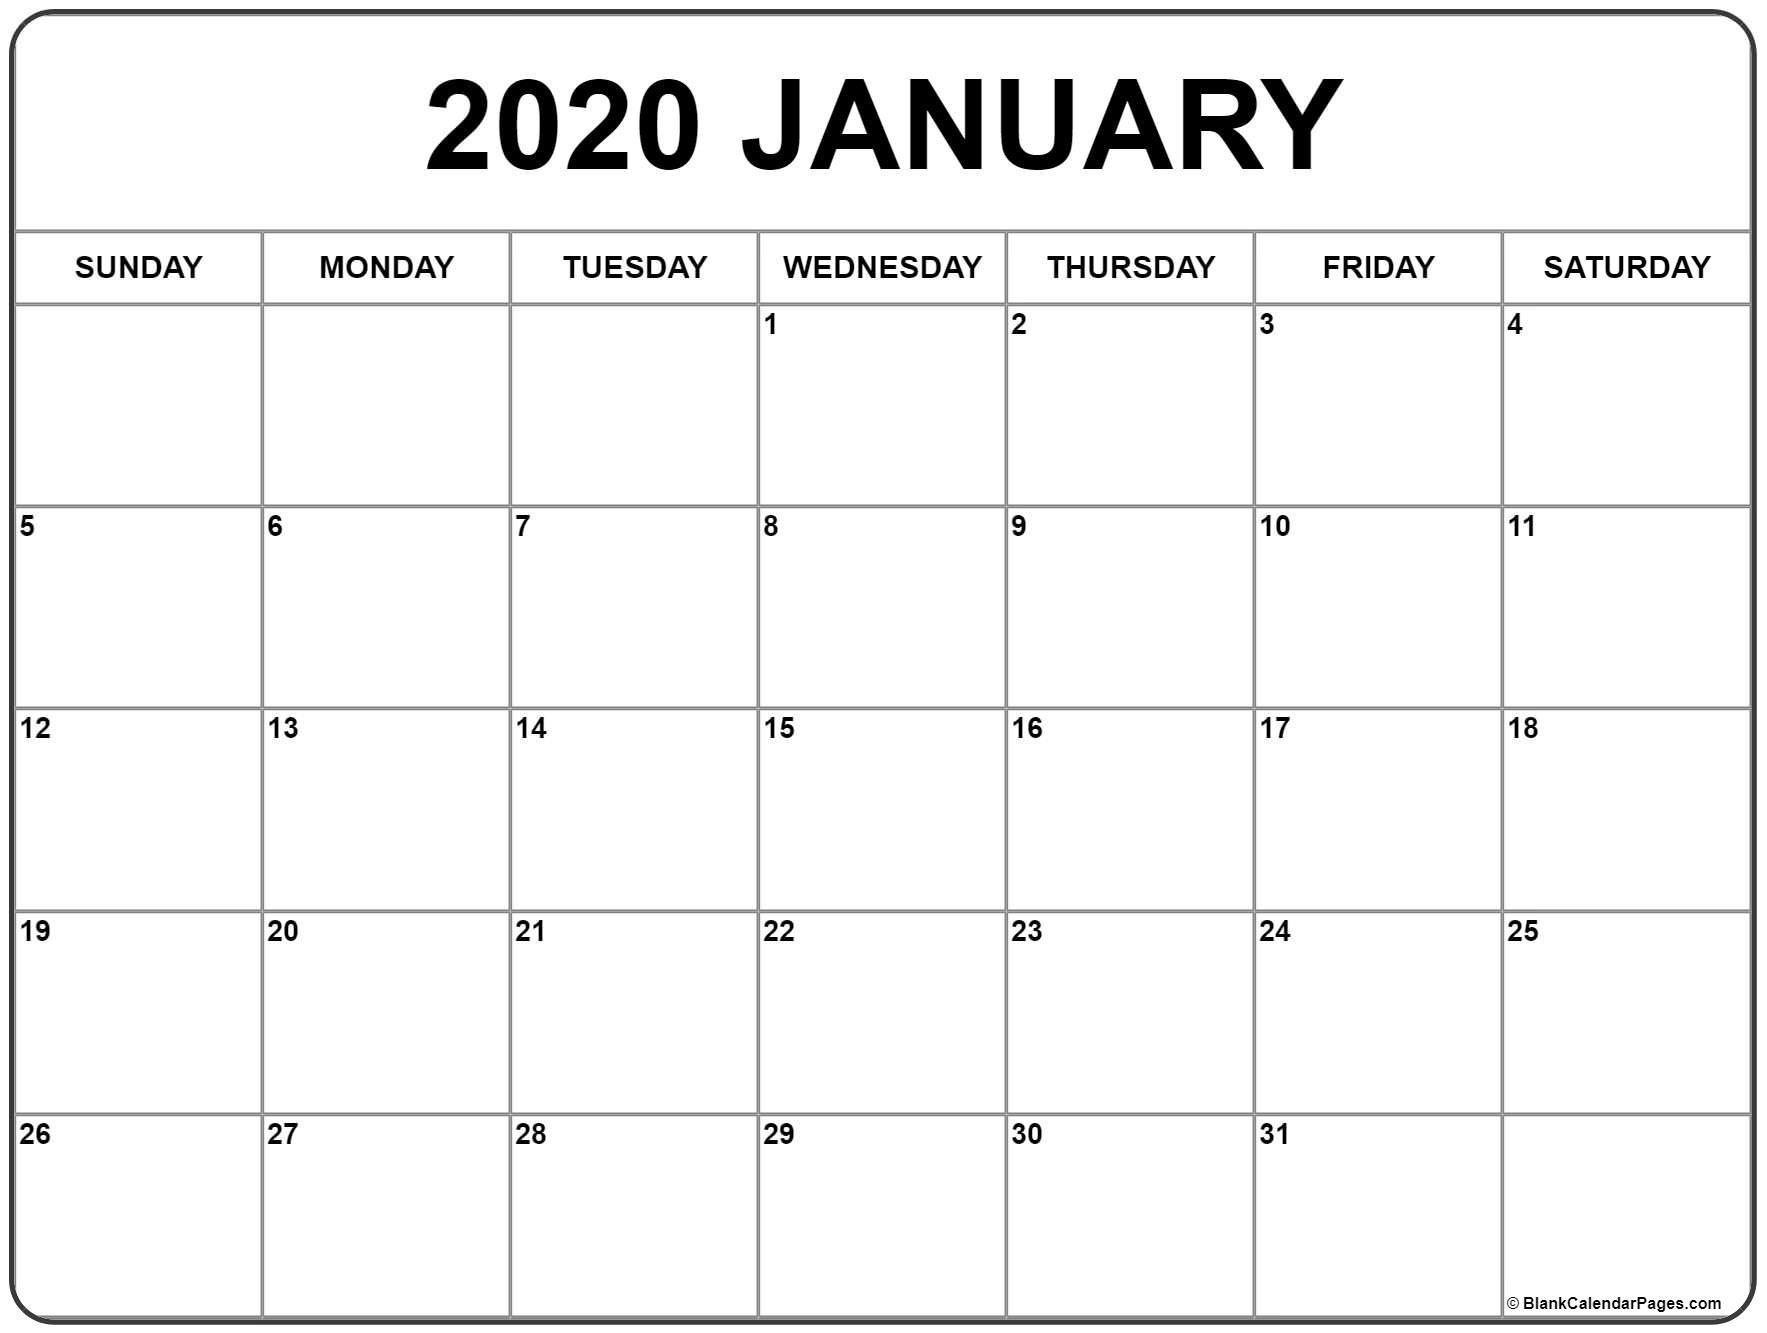 January 2020 Calendar | Free Printable Monthly Calendars Monthly Calendar 2020 Without Weekends